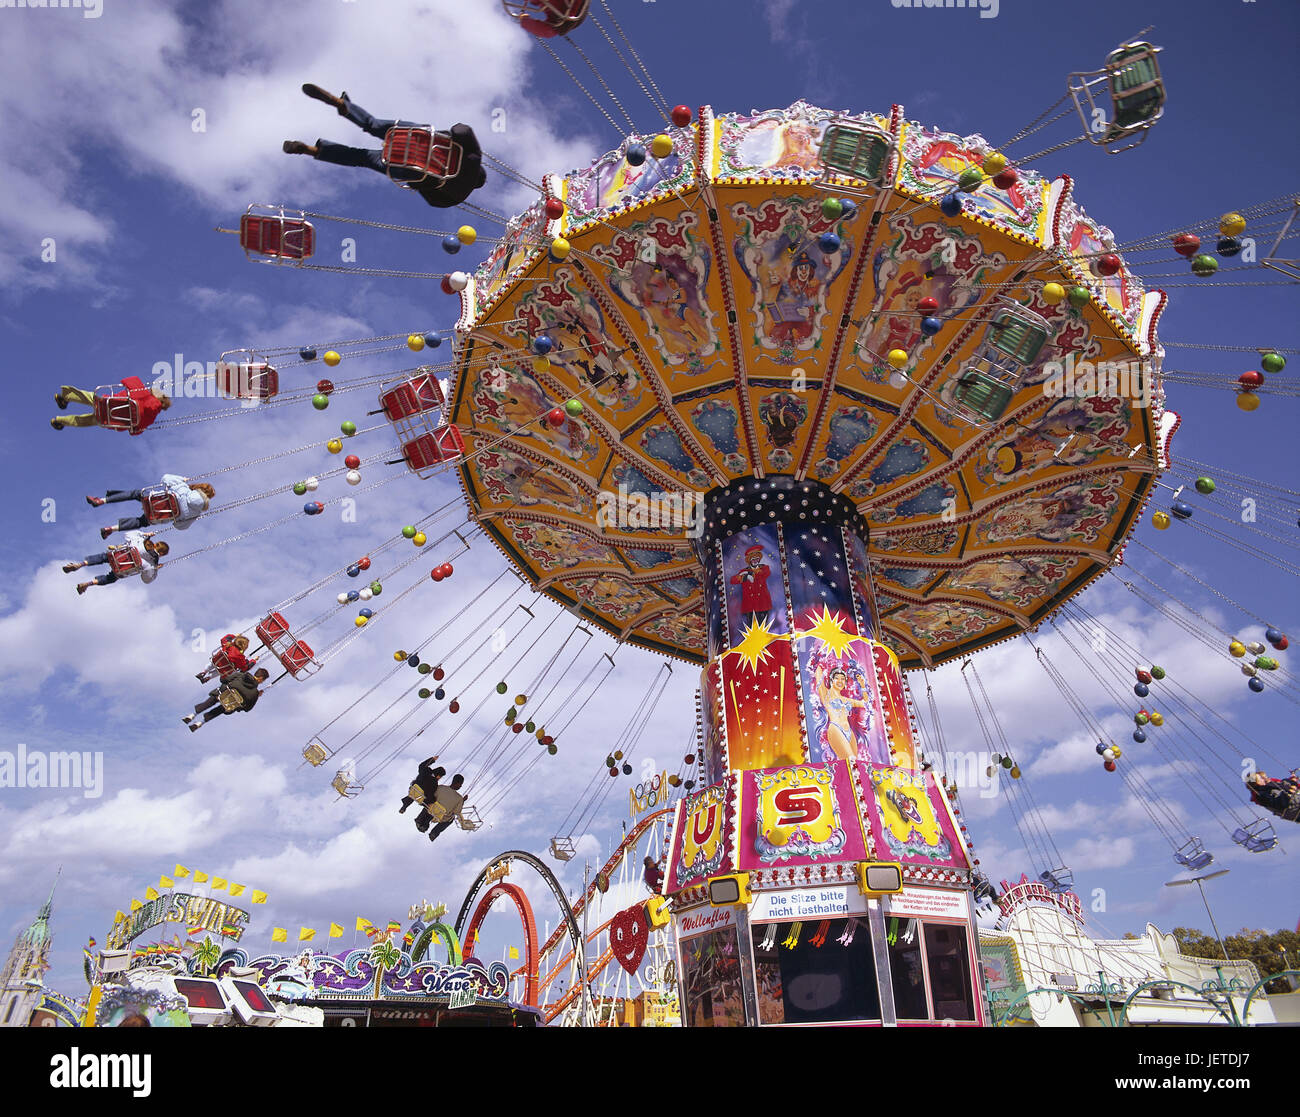 Germany, Bavaria, Munich, October feast, catena carousel, no model release, town, Theresienwiese, Wiesn, feast, public festival, pleasure feast, fairground, driving business, carousel, motion, meadow visitor, person, tourism, attraction, amusement, sky, blue, clouds, sunshine, Stock Photo